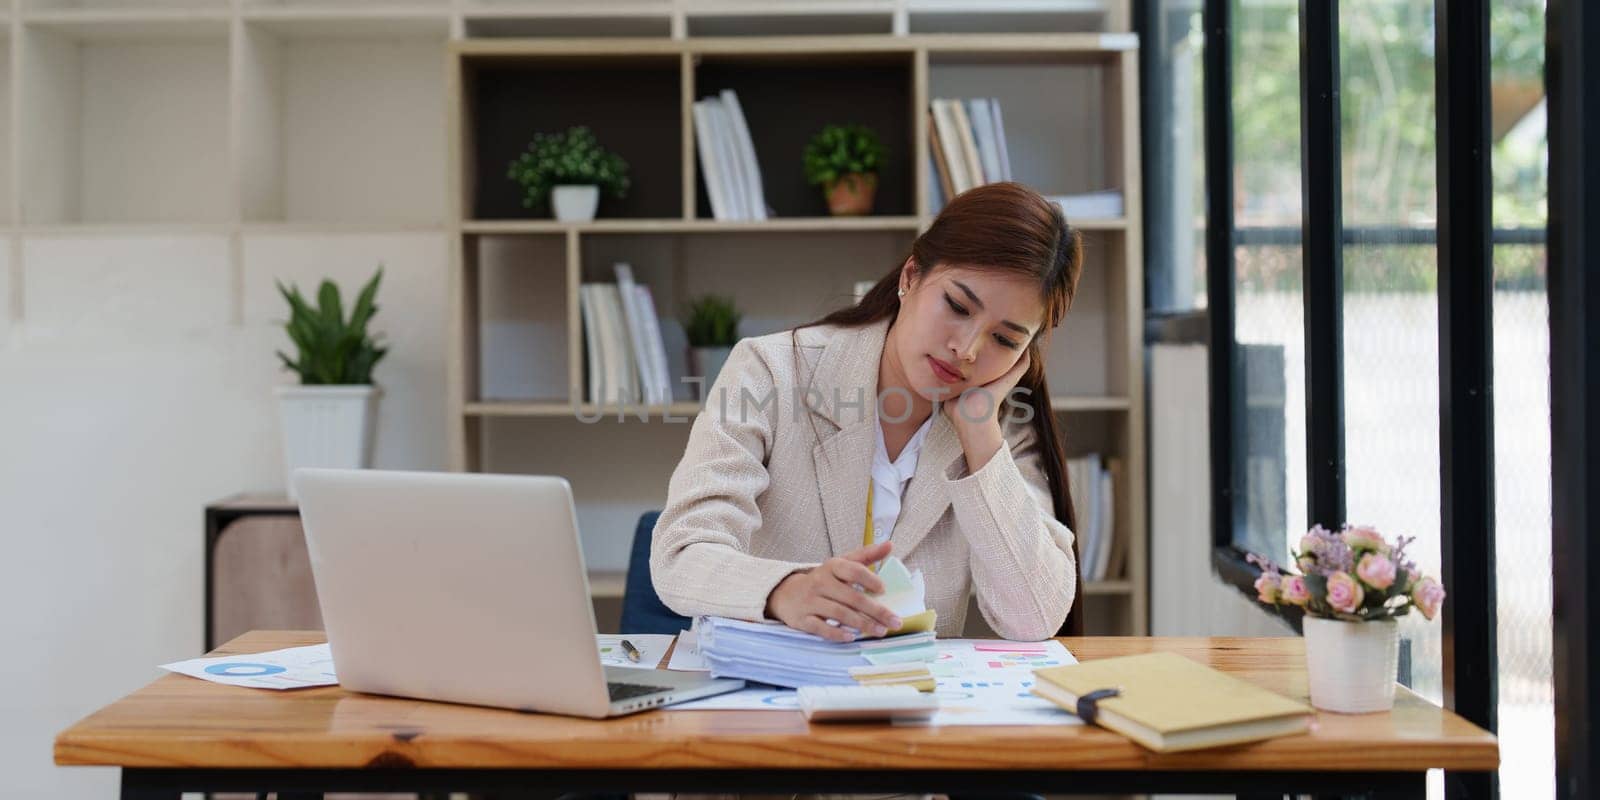 Deadline with young business woman feeling stressed concept. Business woman working at office, business finance concept.